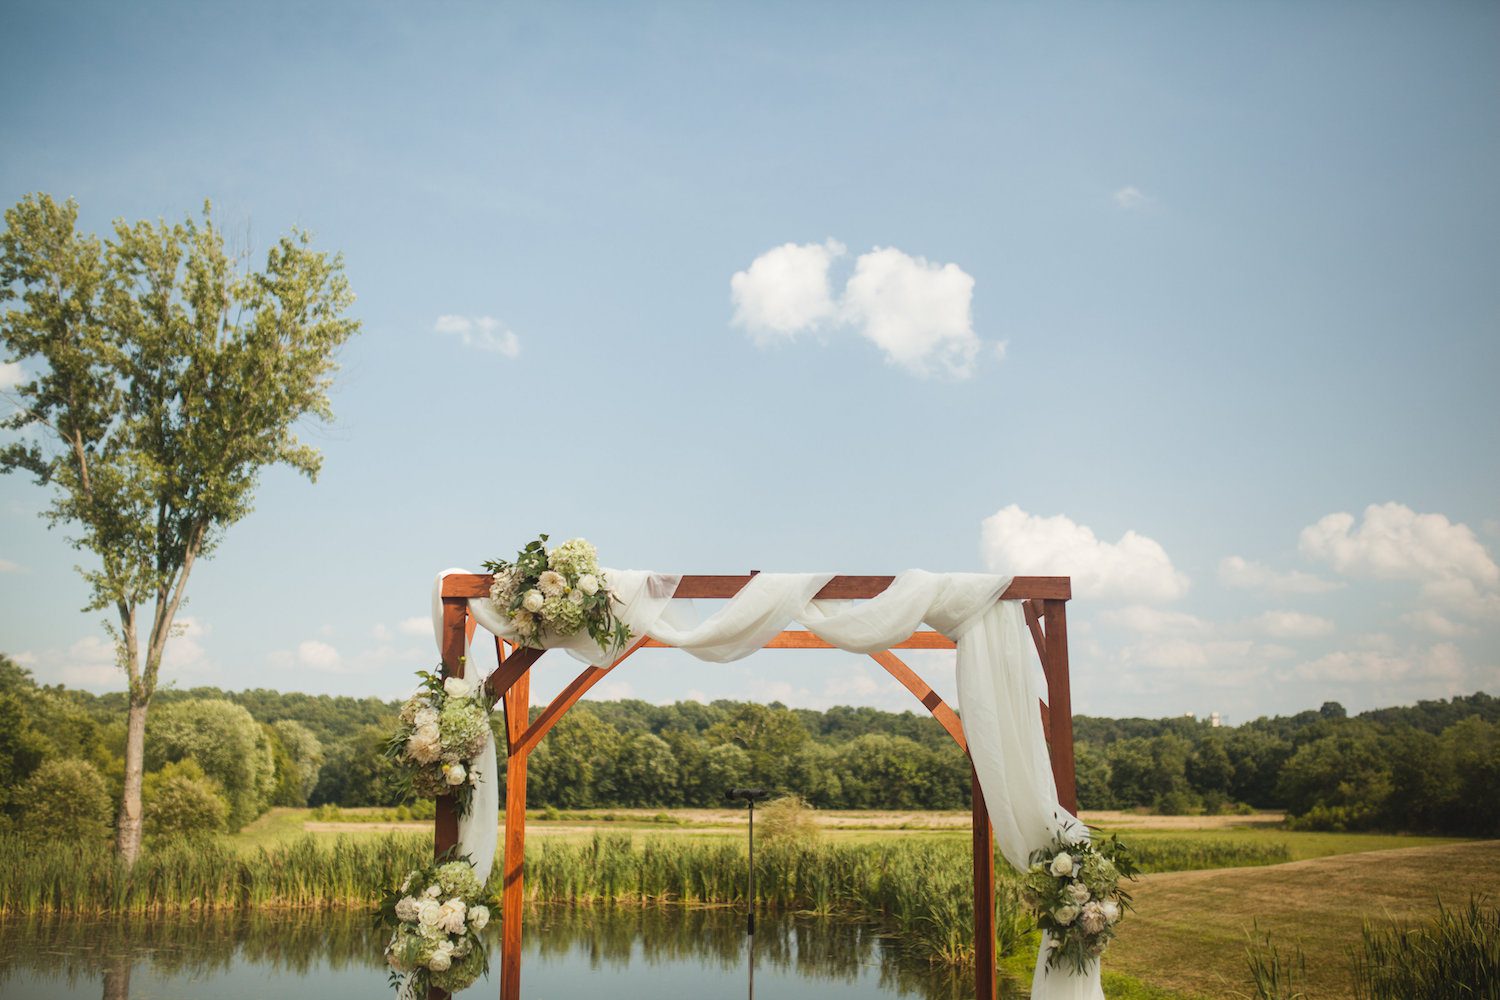 A friend of Danielle's father built the Chuppah that featured cascading flower bundles. Photography by Carly Romeo + Co.